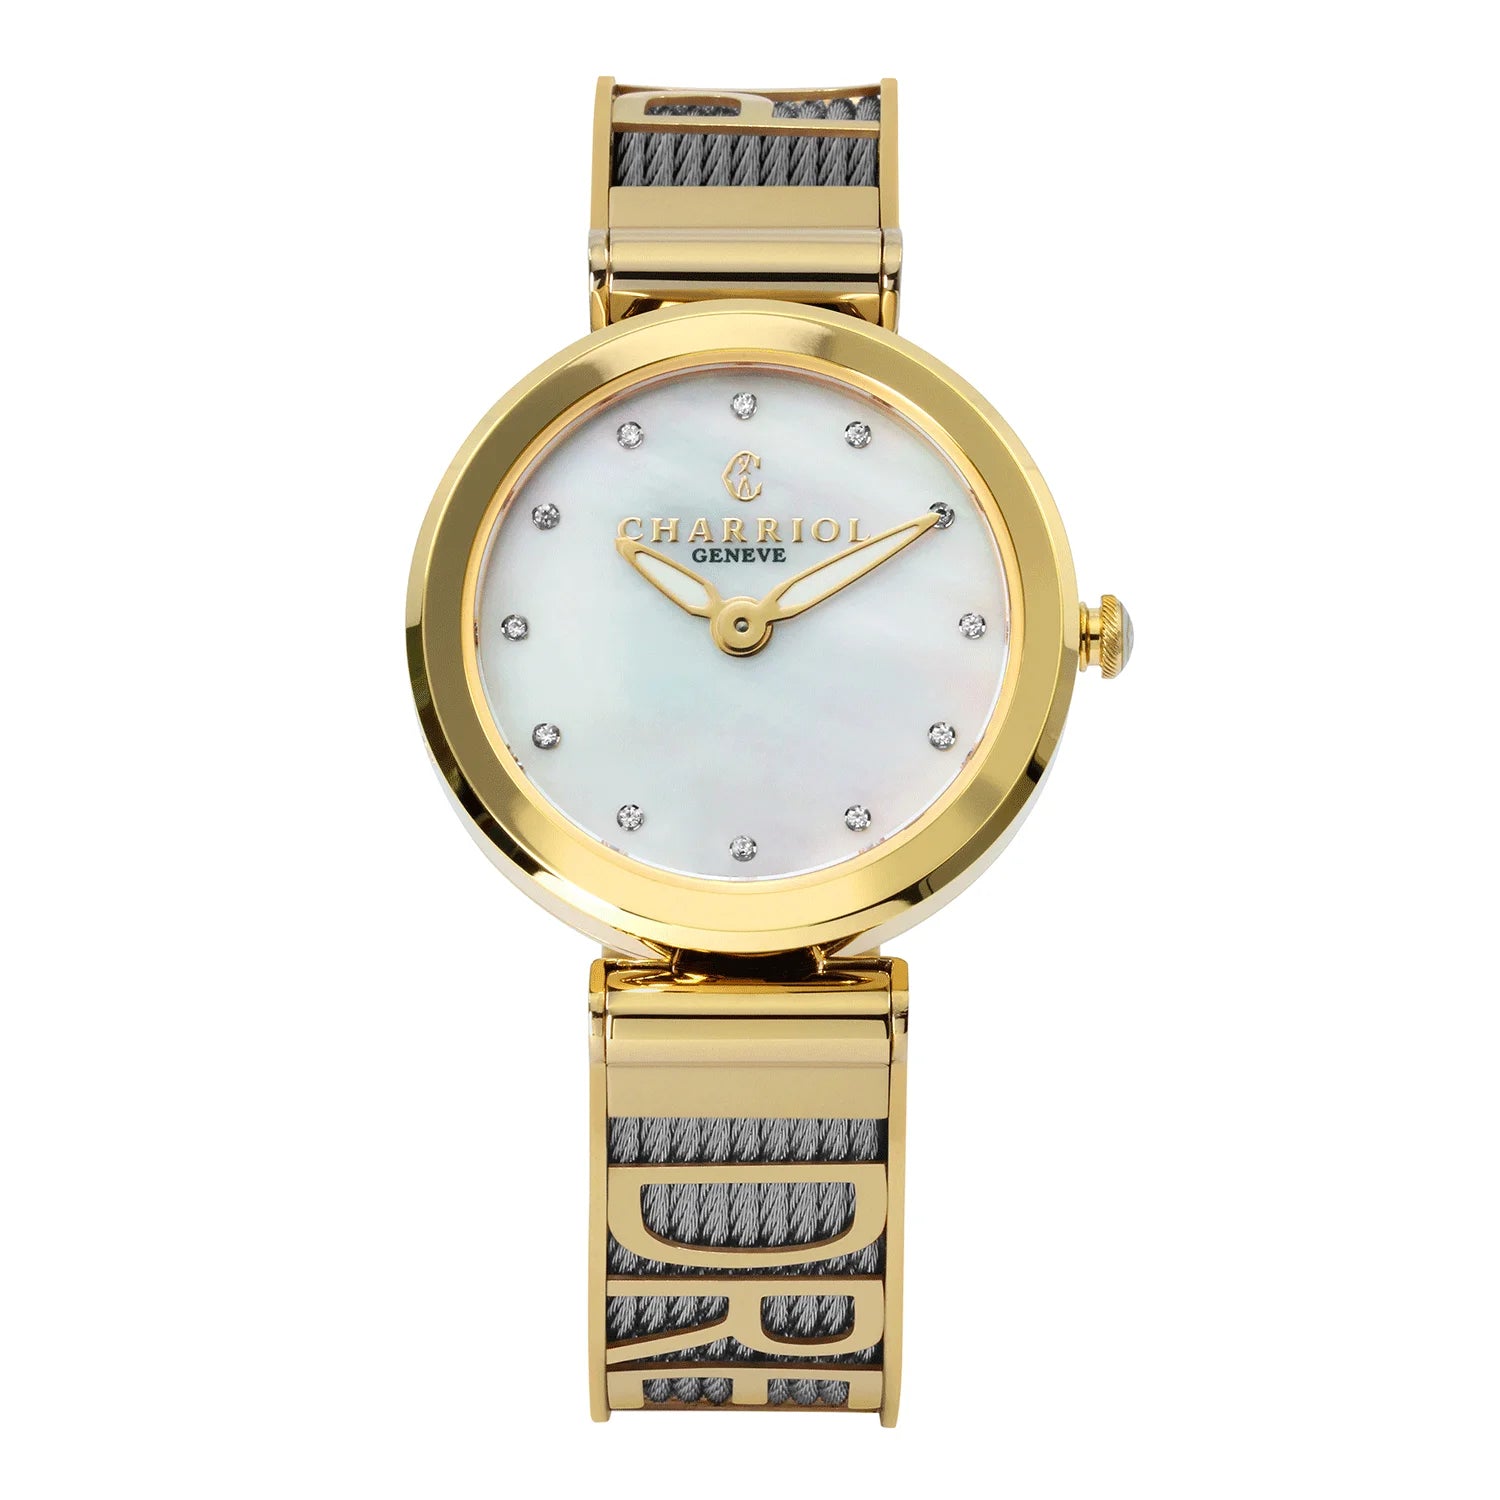 FOREVER YOURS, 32MM, QUARTZ CALIBRE, MOTHER-OF-PEARL WITH 12 DIAMONDS DIAL, YELLOW GOLD PVD BEZEL, STEEL CABLE BRACELET - Charriol Geneve -  Watch